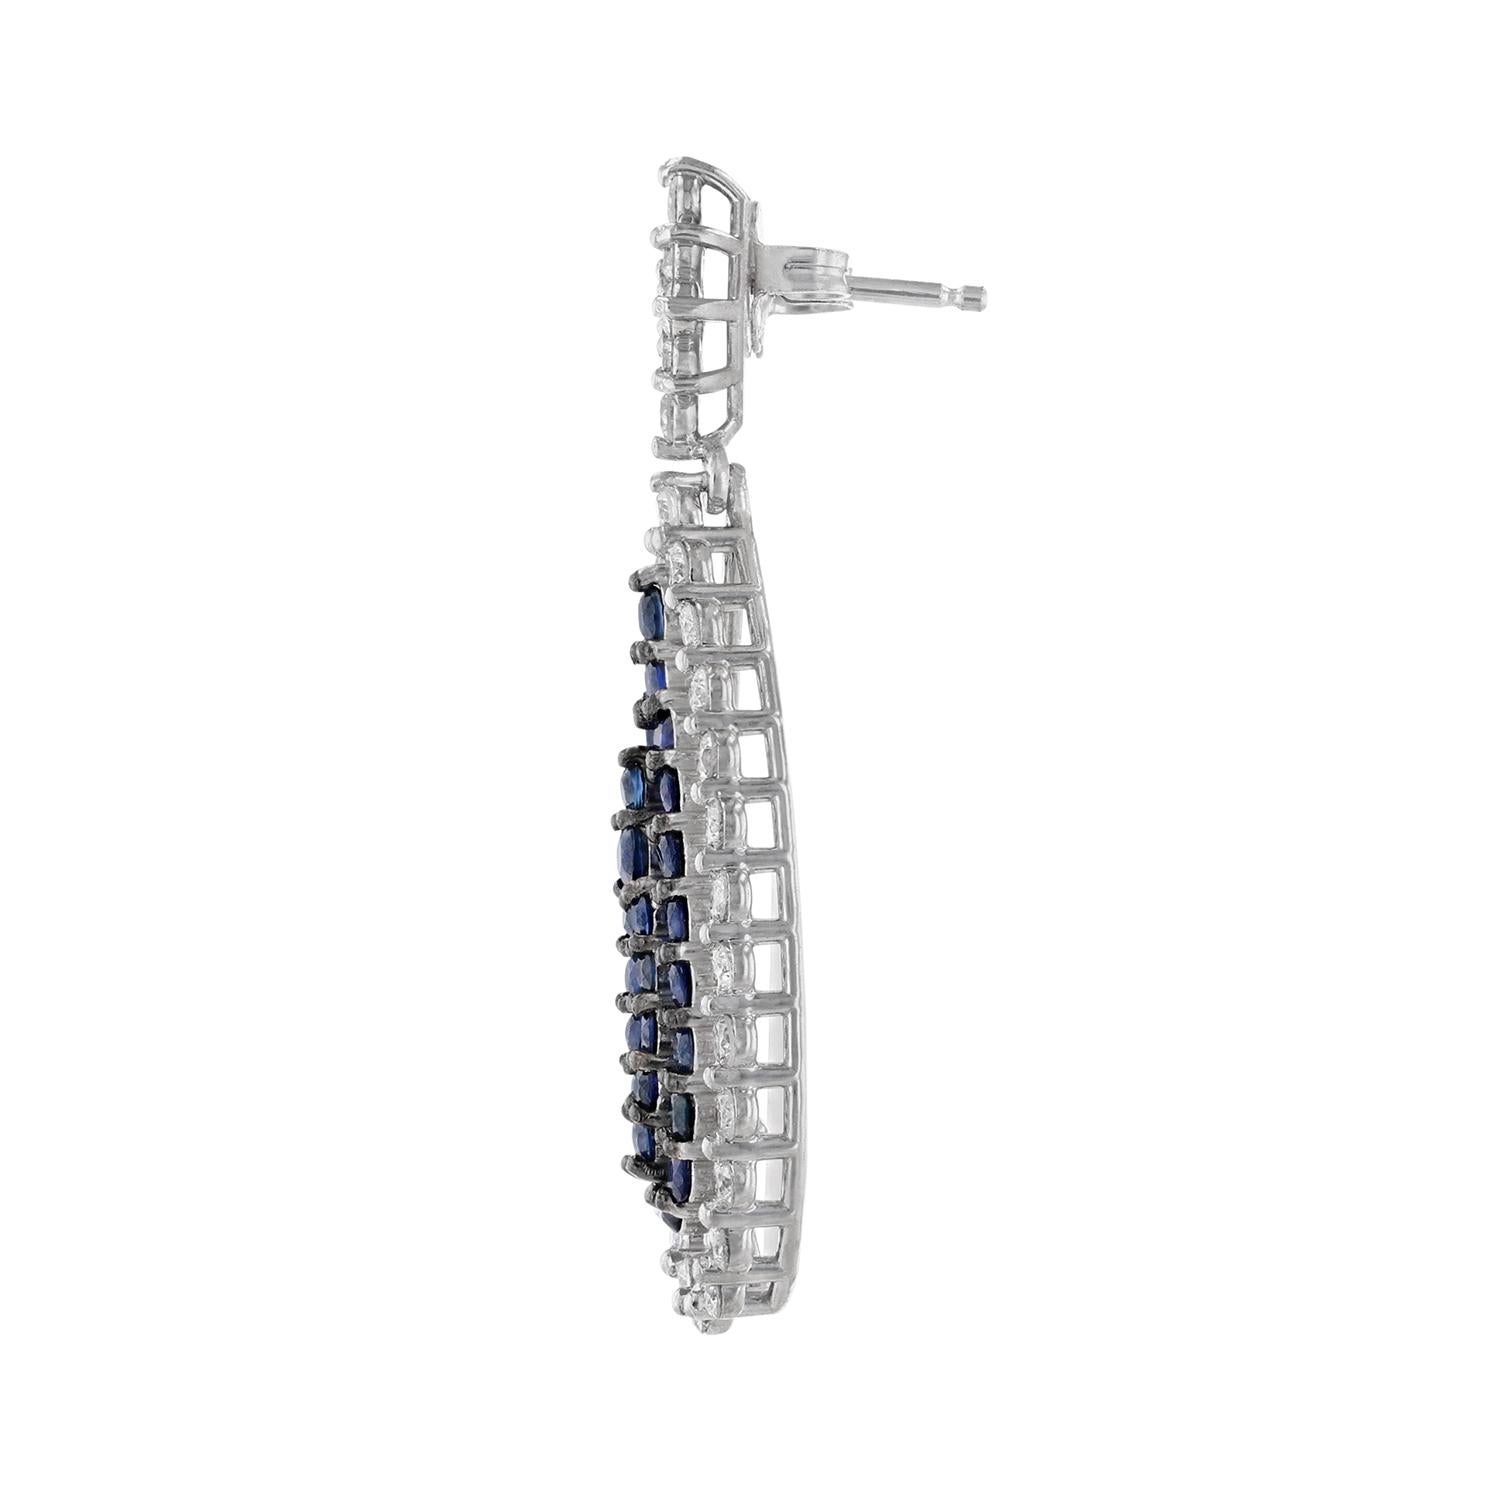 These teardrop shape earrings are made in 14K white gold and feature 60 blue sapphires weighing 2.30 carat. Along with 70 round diamonds weighing 2.06 carat. All stones are prong set. 

